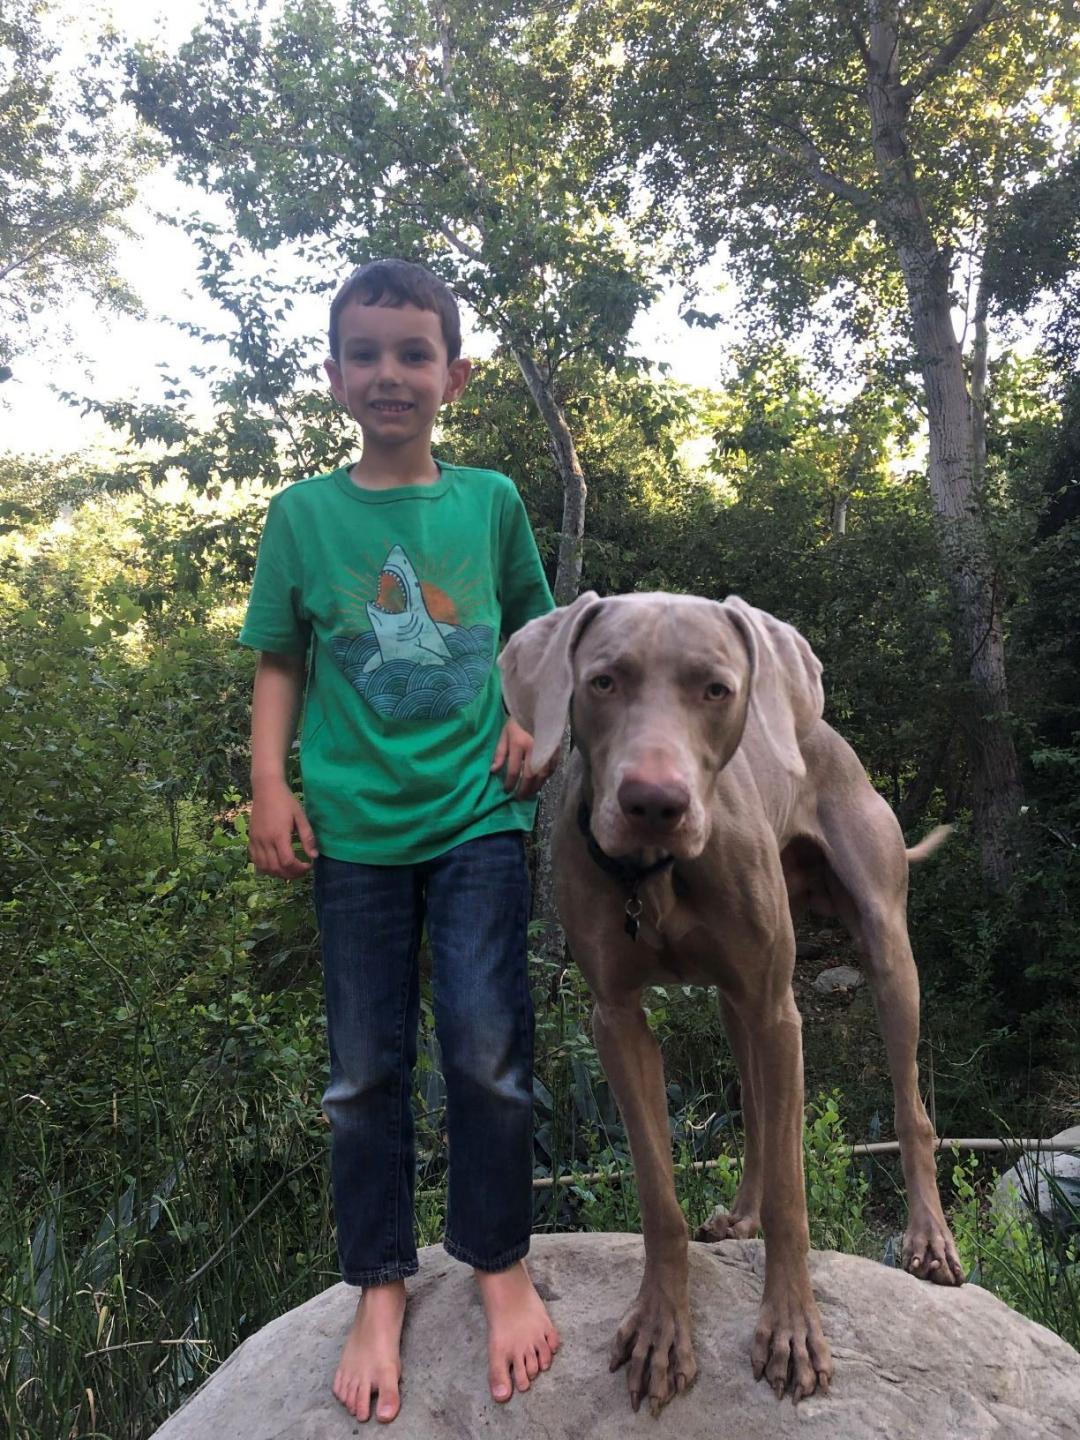 Andrea's son with family dog.